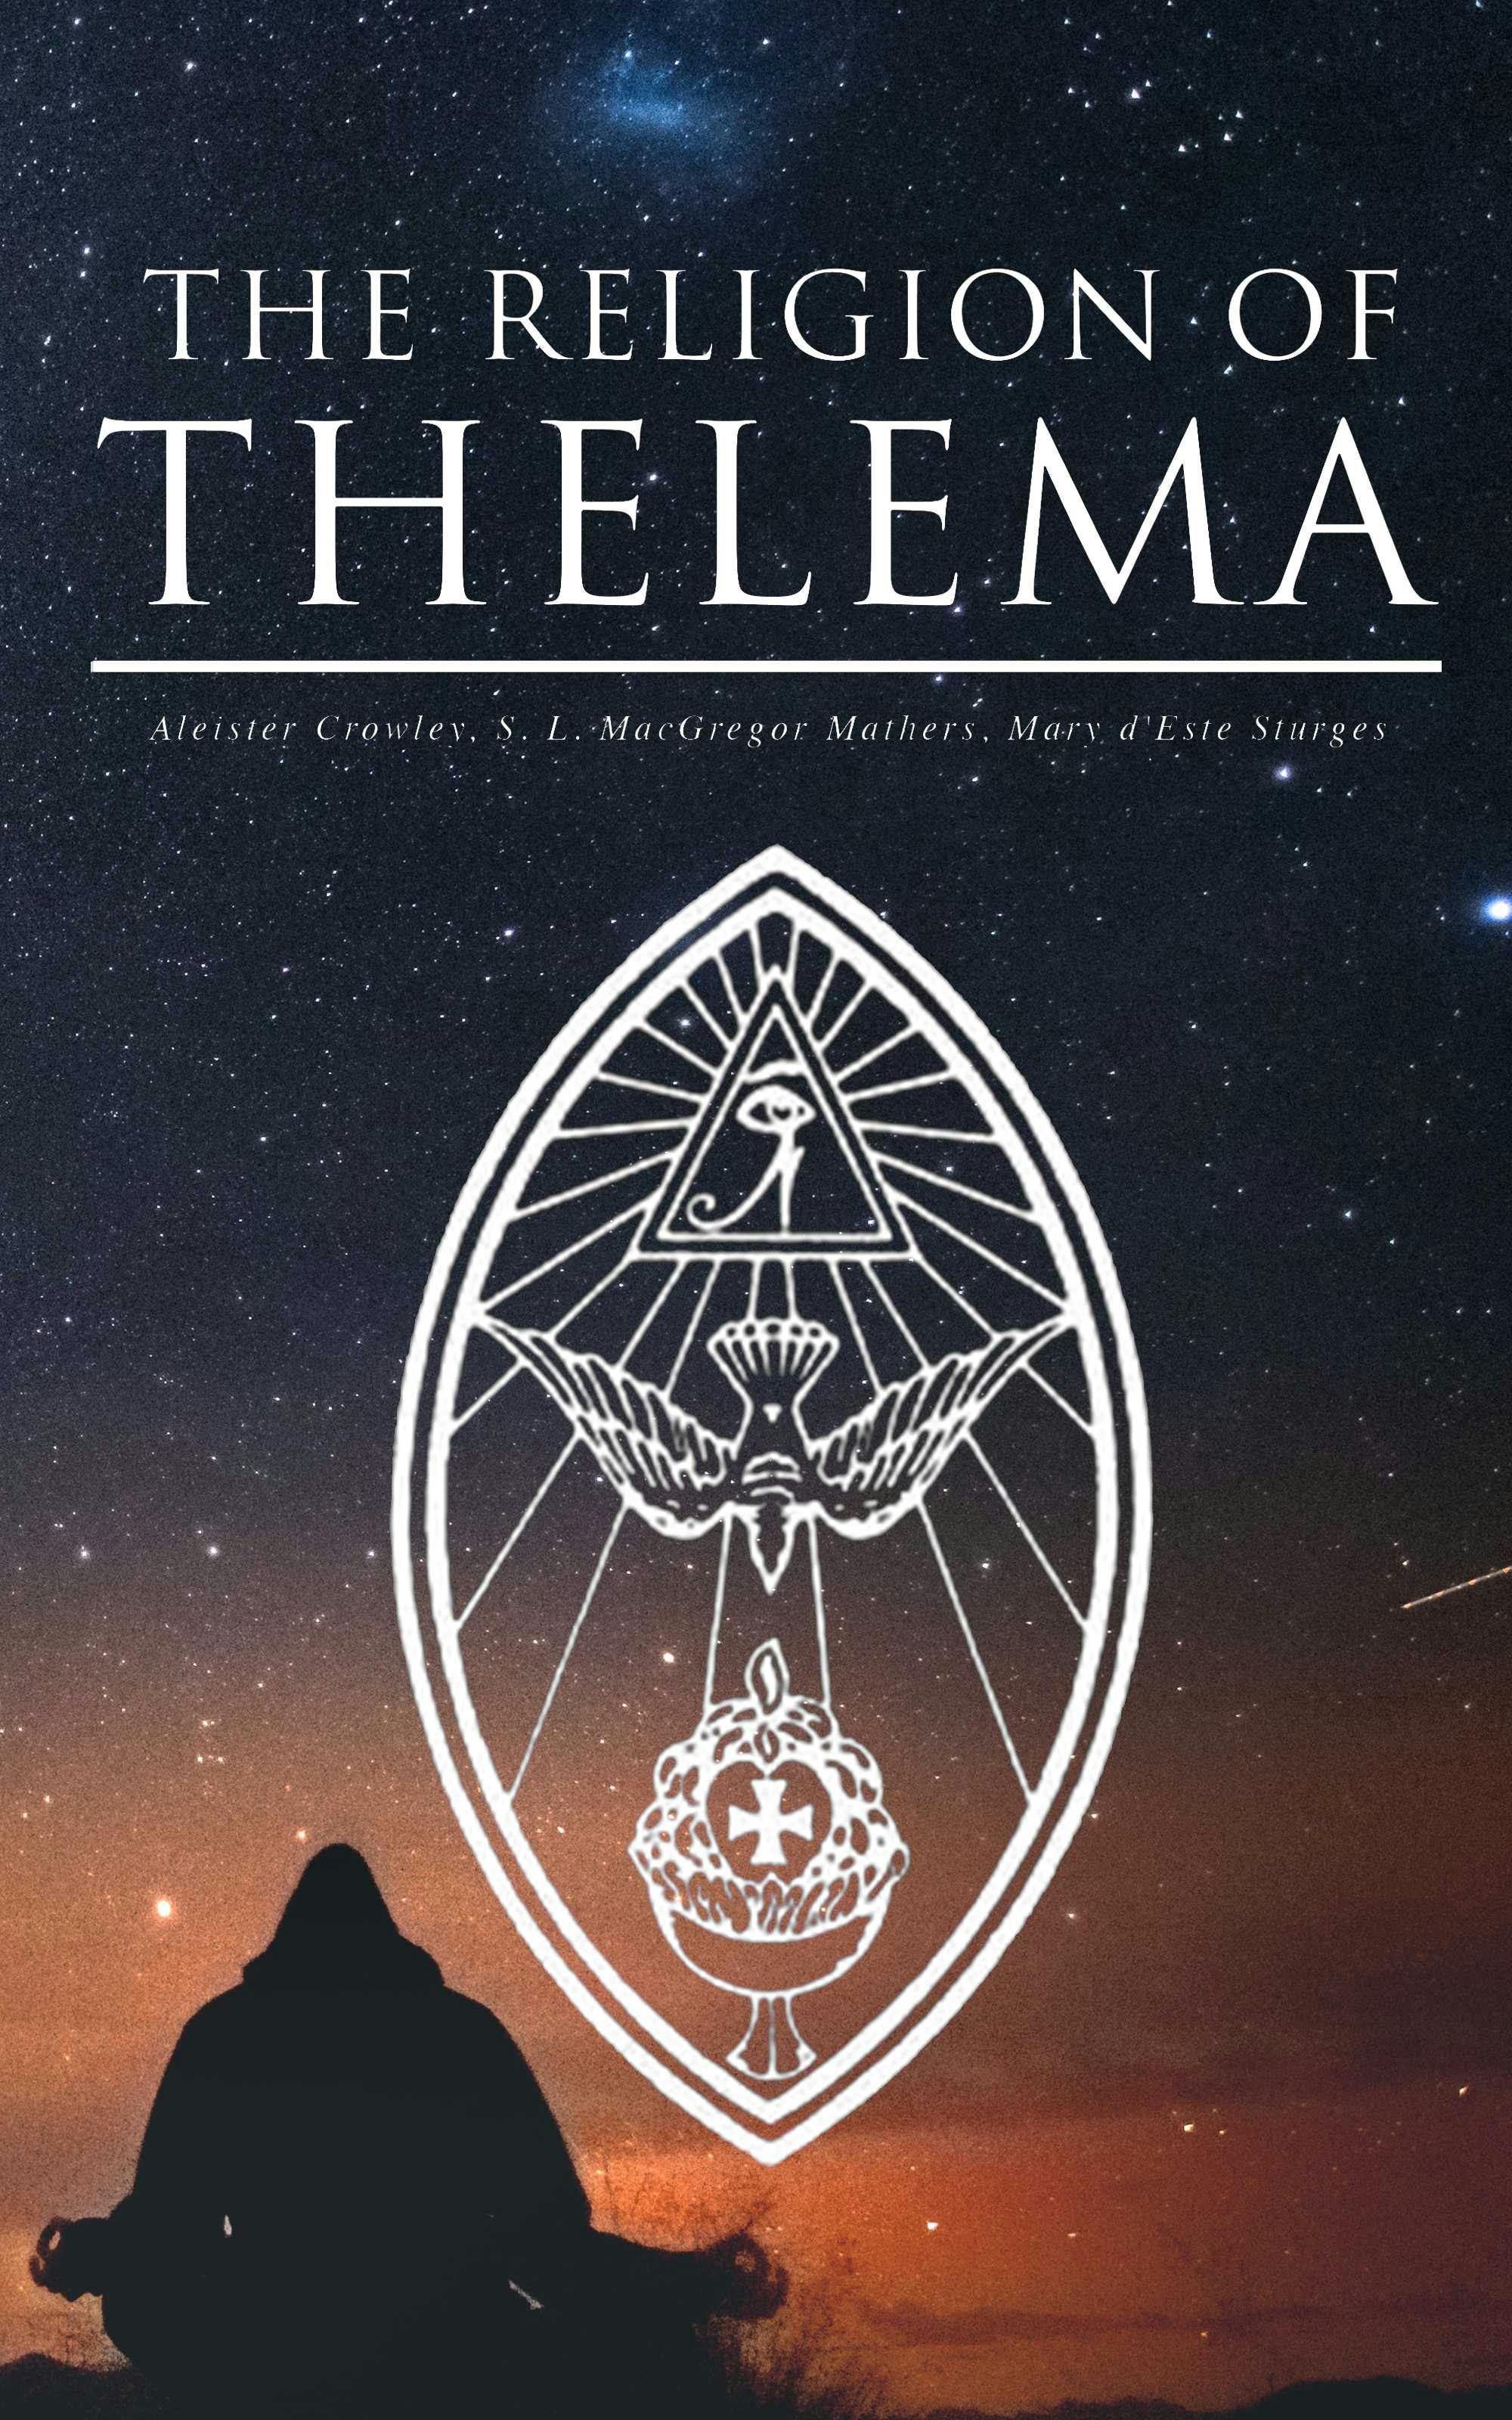 THE RELIGION OF THELEMA: Sacred Texts: The Book of the Law, Ecclesiæ Gnosticæ Catholicæ Creed - Mary d'Este Sturges, S. L. MacGregor Mathers, Aleister Crowley